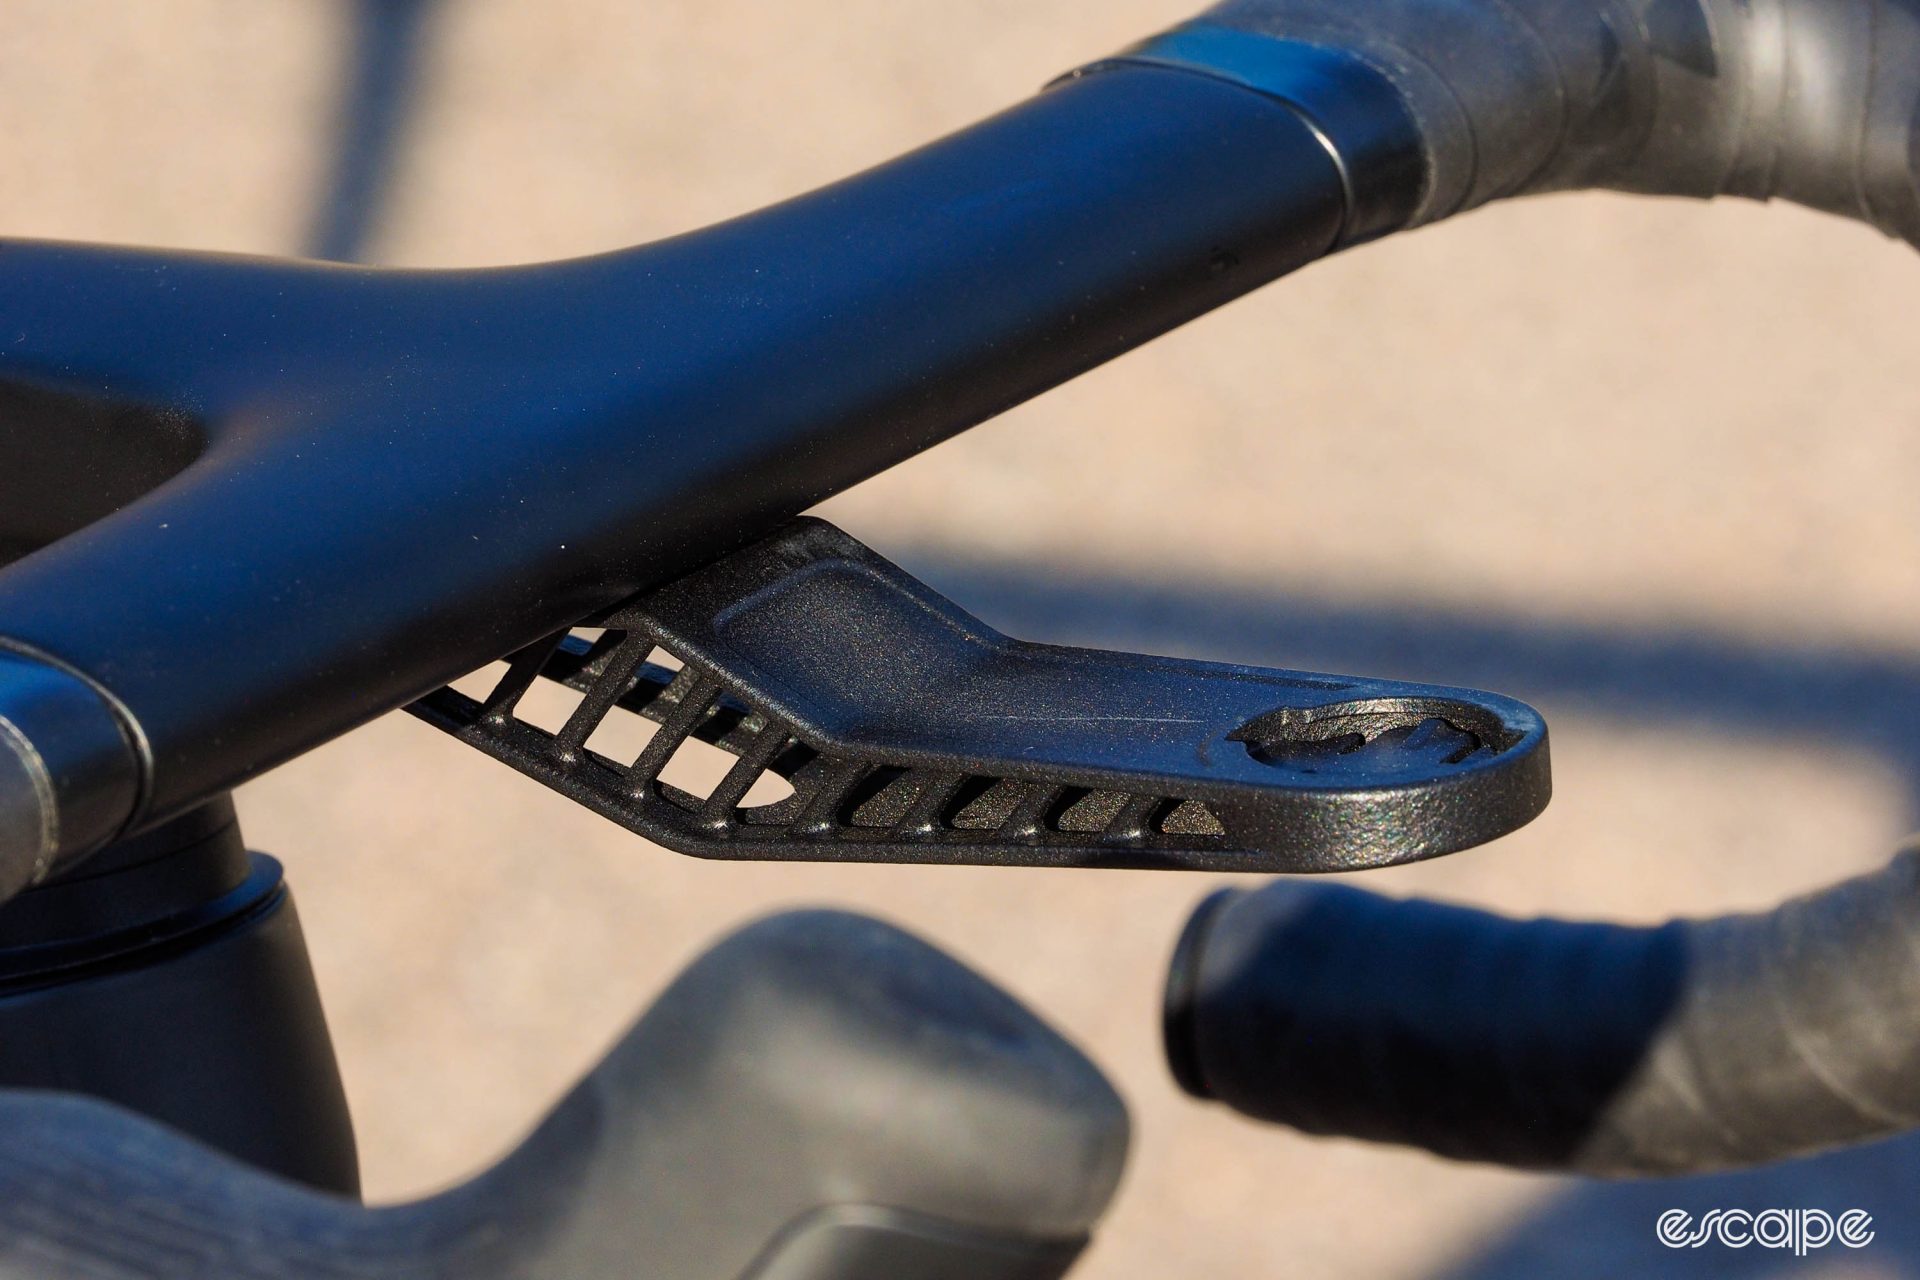 Canyon includes its 3D-printed computer mount. It attaches to the front of the handlebar and features a low-profile design that holds your computer screen flush with the top of the handlebar tops.